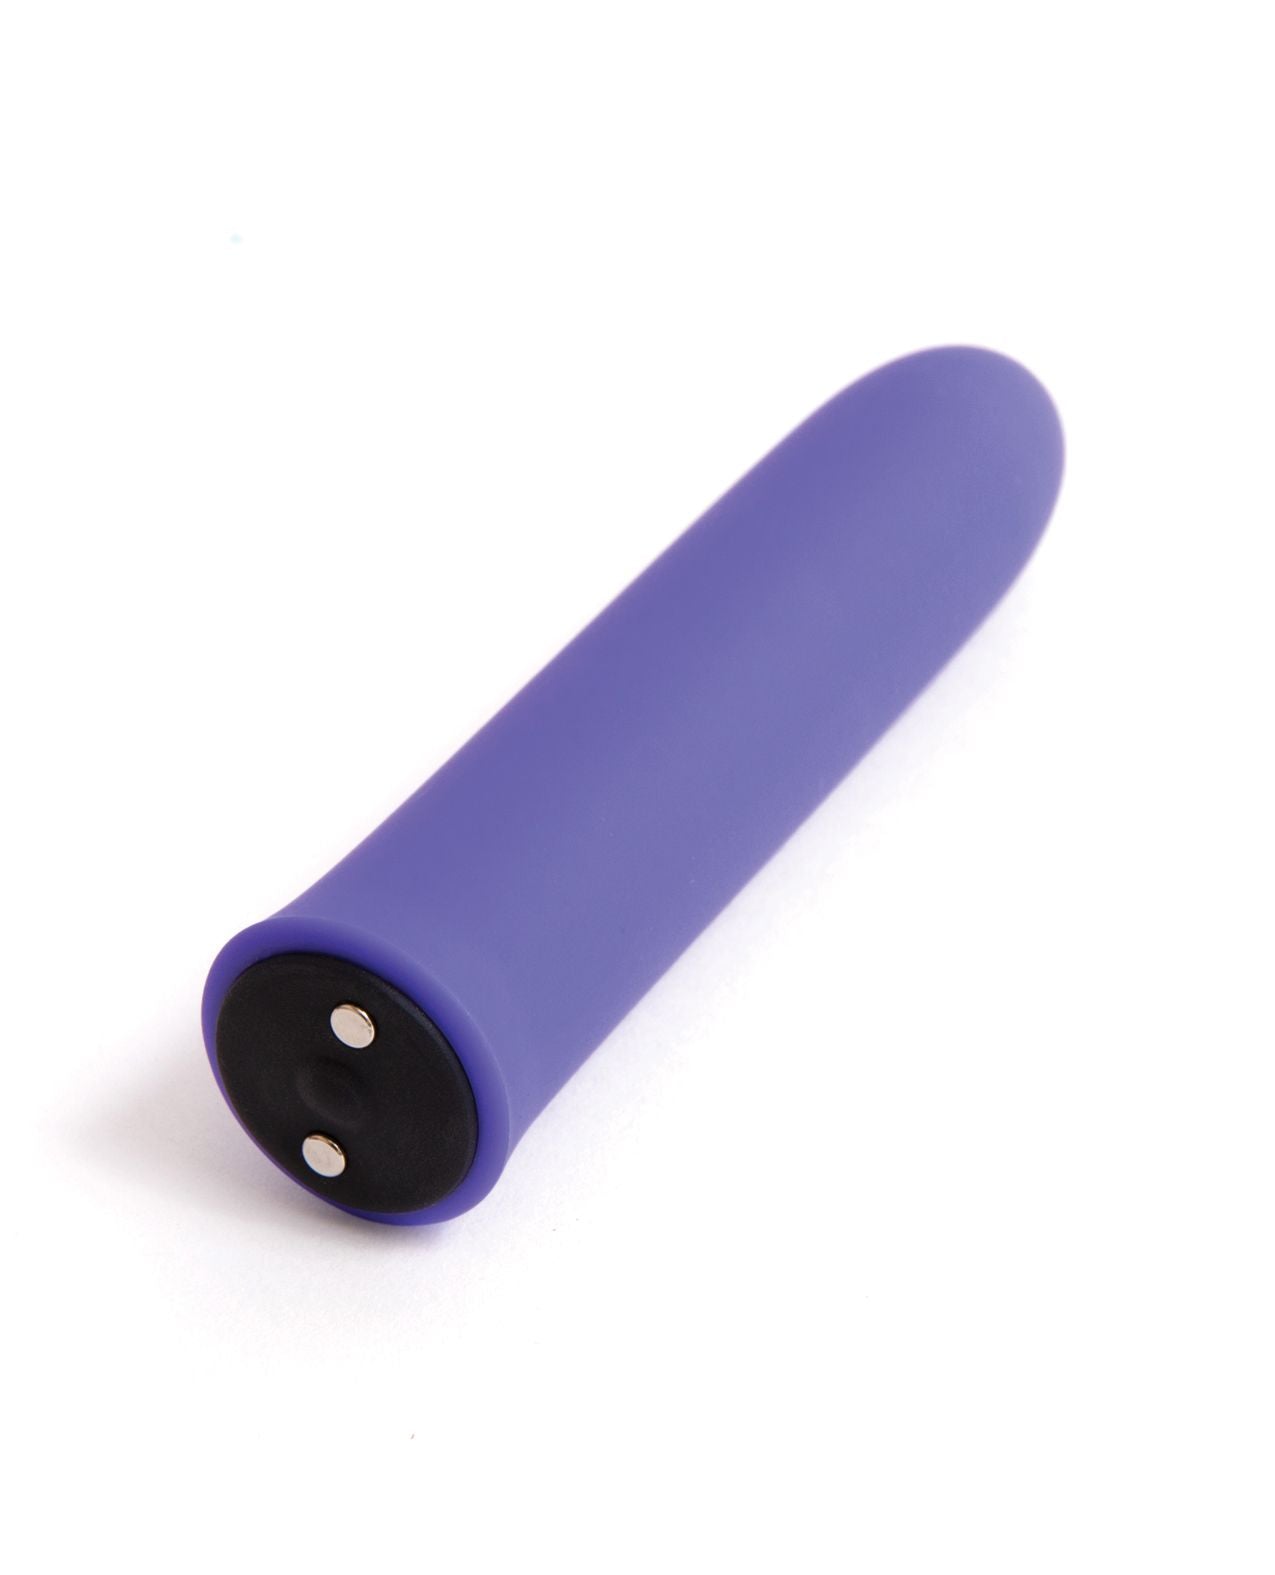 Back angle view of the bullet shows the magnetic charging ports at the bottom and its small size (ultra violet).